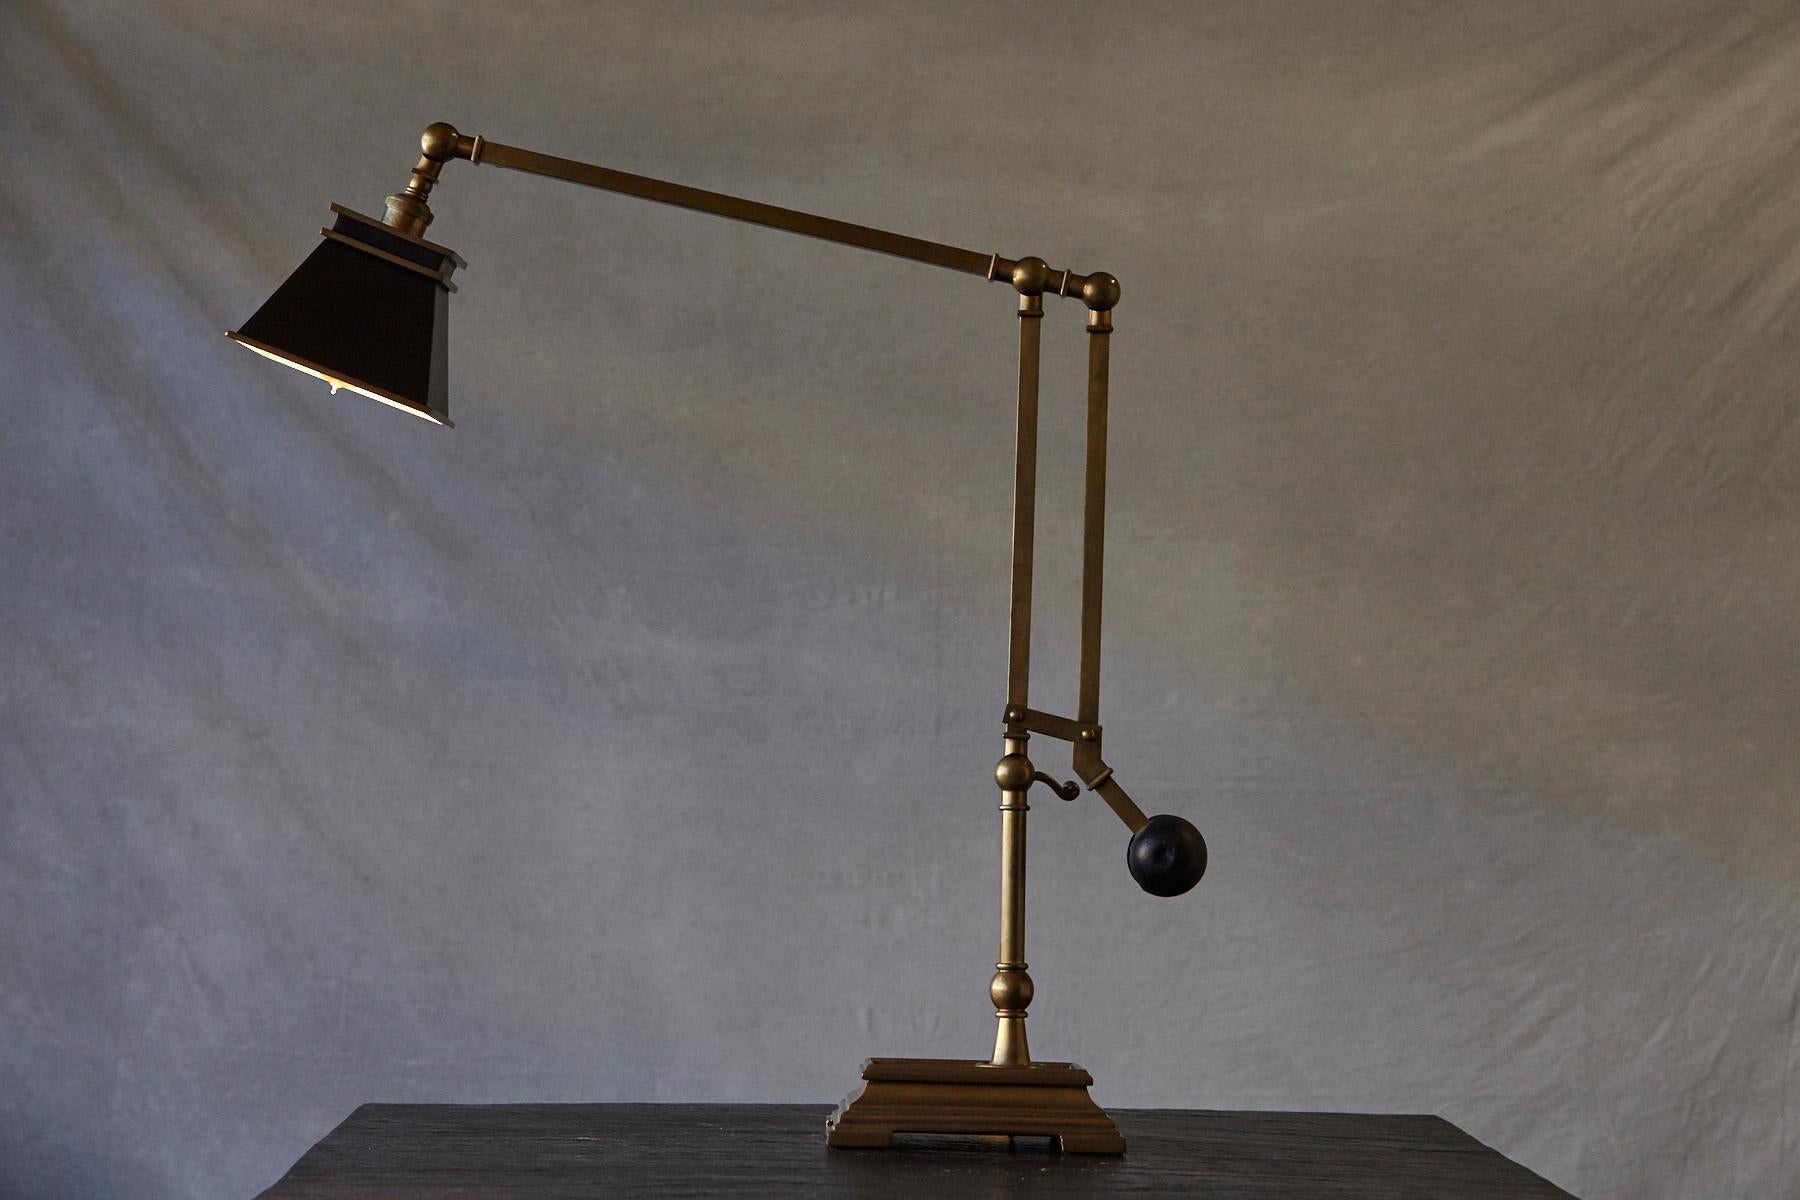 Burnished Chapman Engravers Weight Balanced Brass Desk Lamp with Square Black Shade